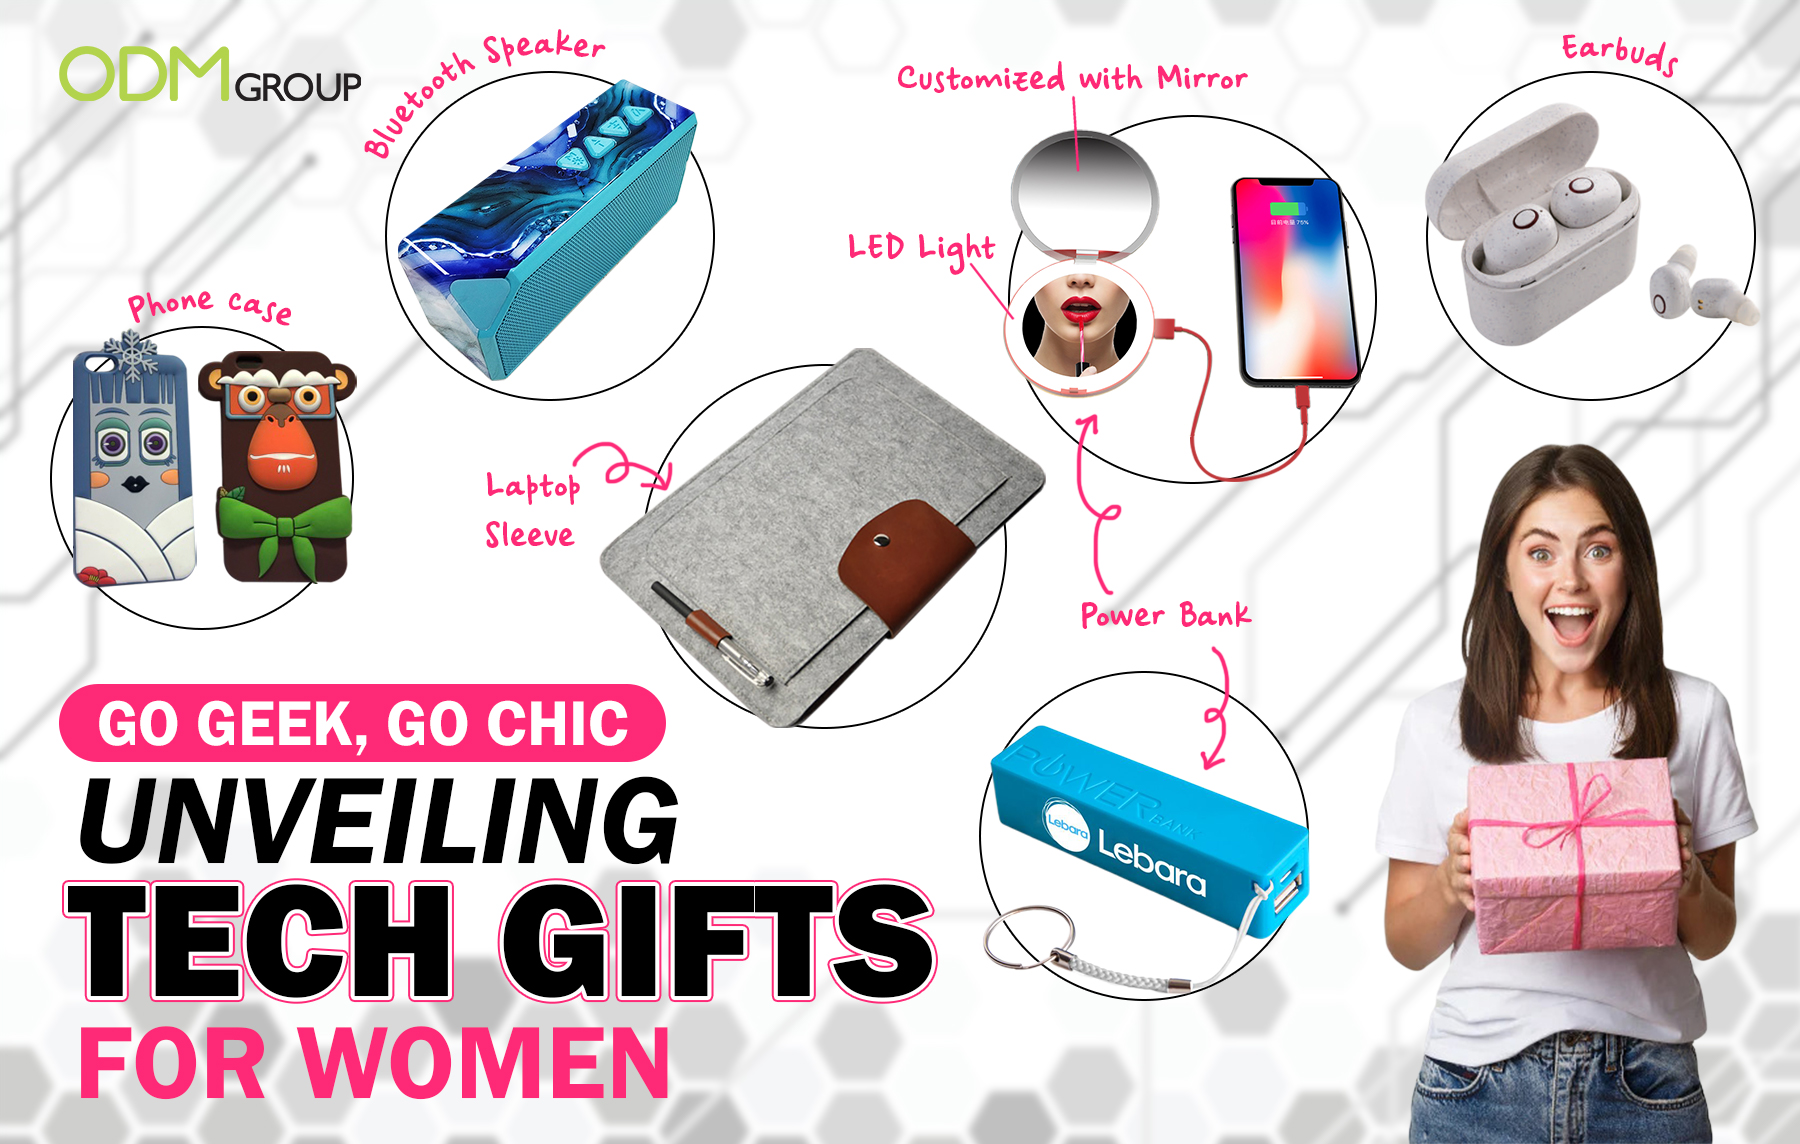 Tech gifts for women including Bluetooth speaker, phone case, earbuds, power bank, and customized mirror with LED light.